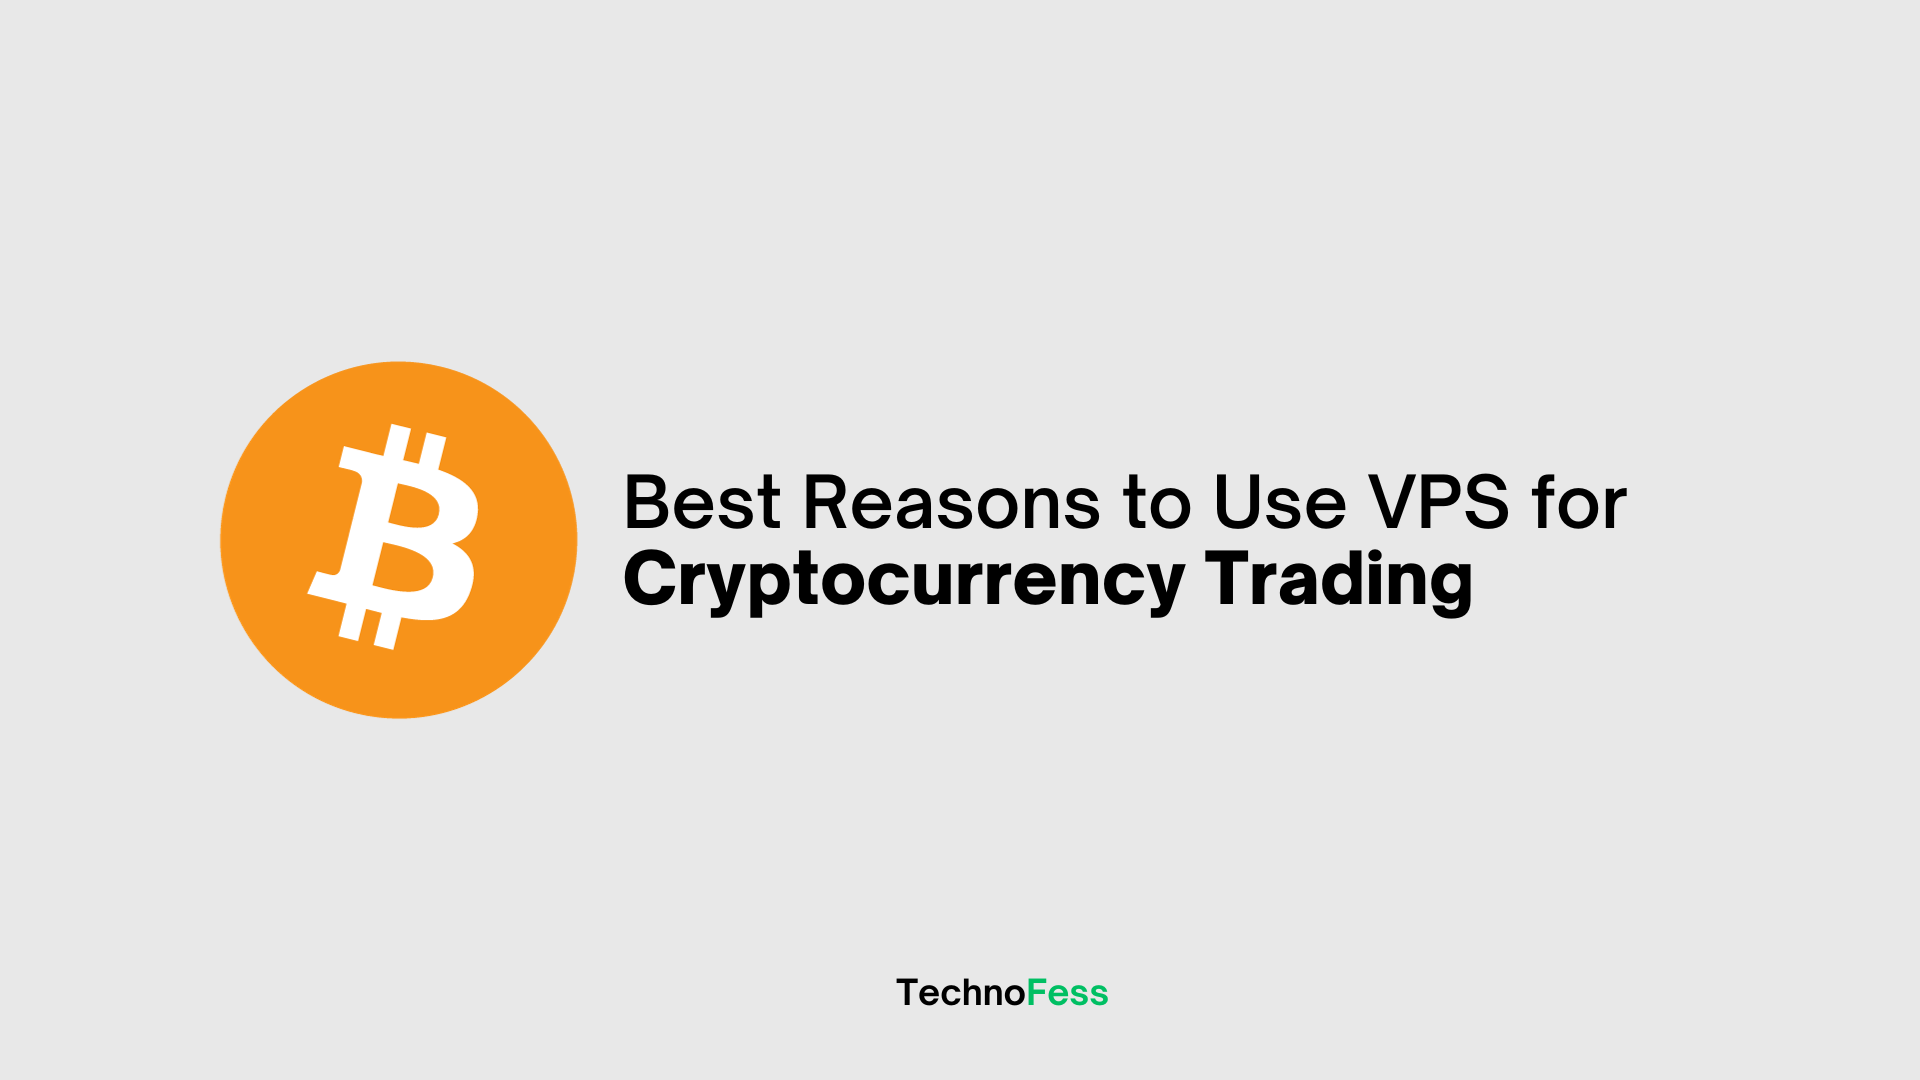 Best Reasons to Use VPS for Cryptocurrency Trading